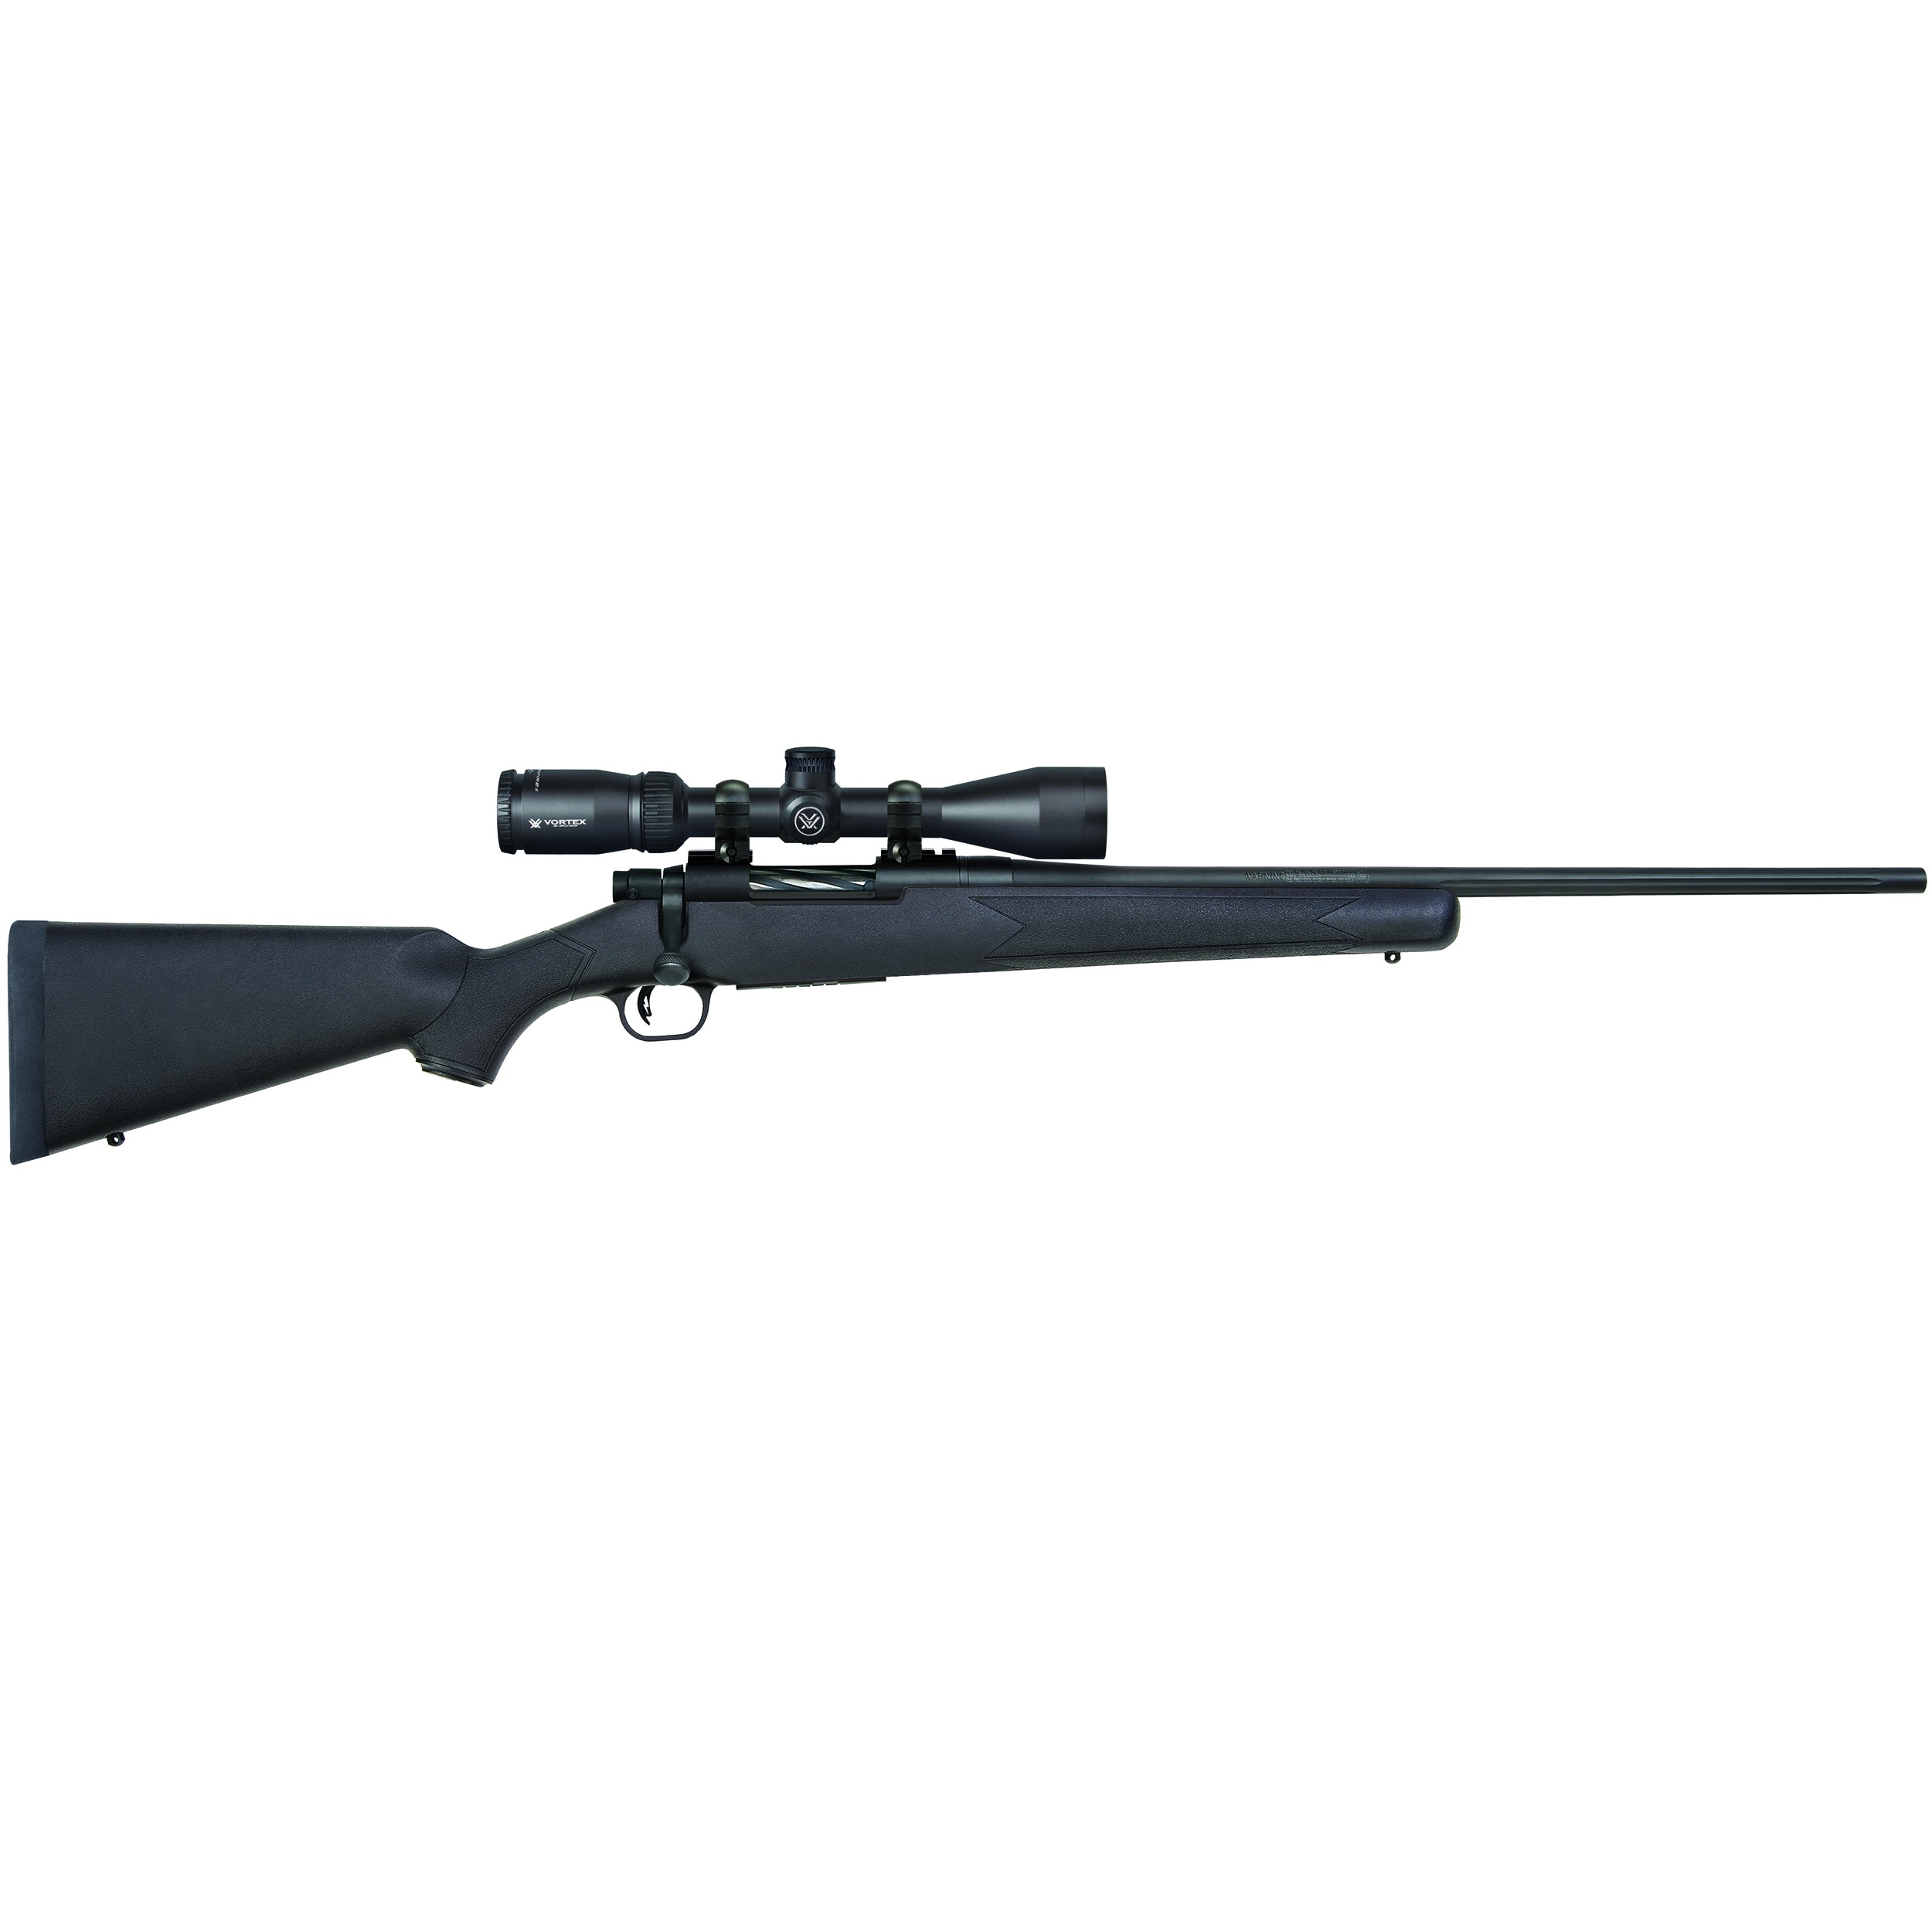 Buy Mossberg Patriot Synthetic 308 Winchesters at SWFA.com